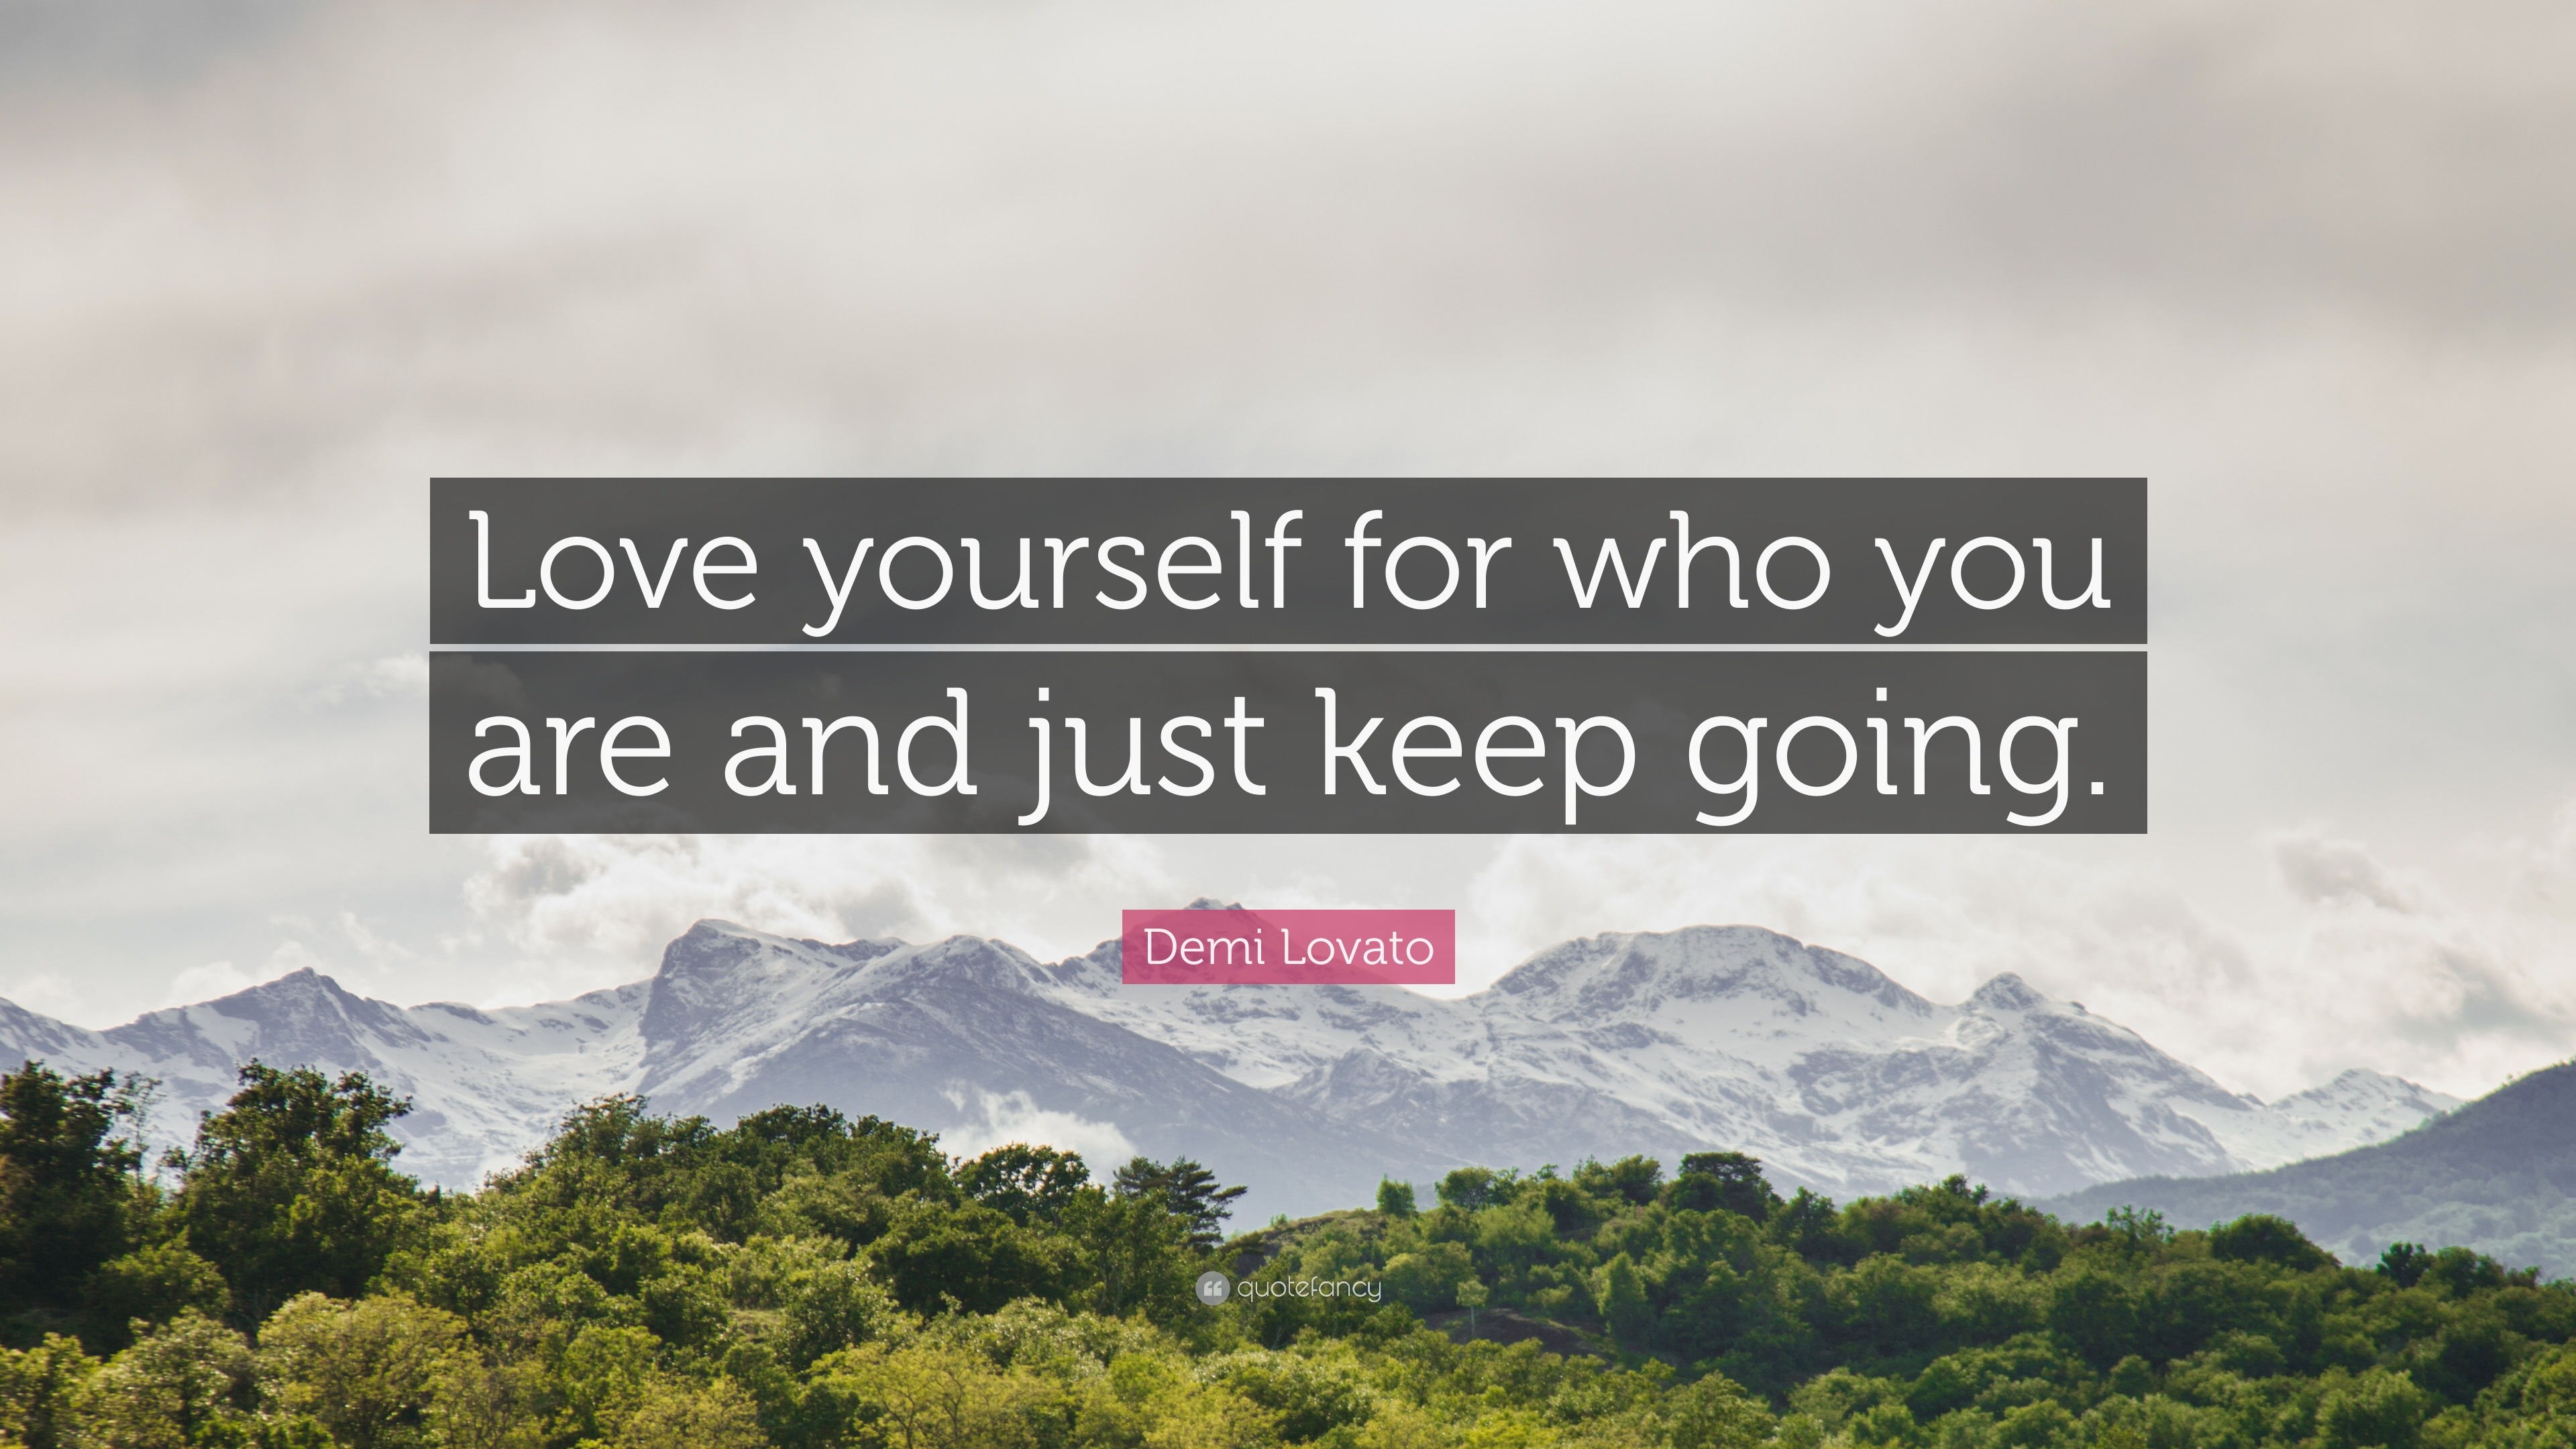 Demi Lovato Quote Love Yourself For Who You Are And Just Keep Going